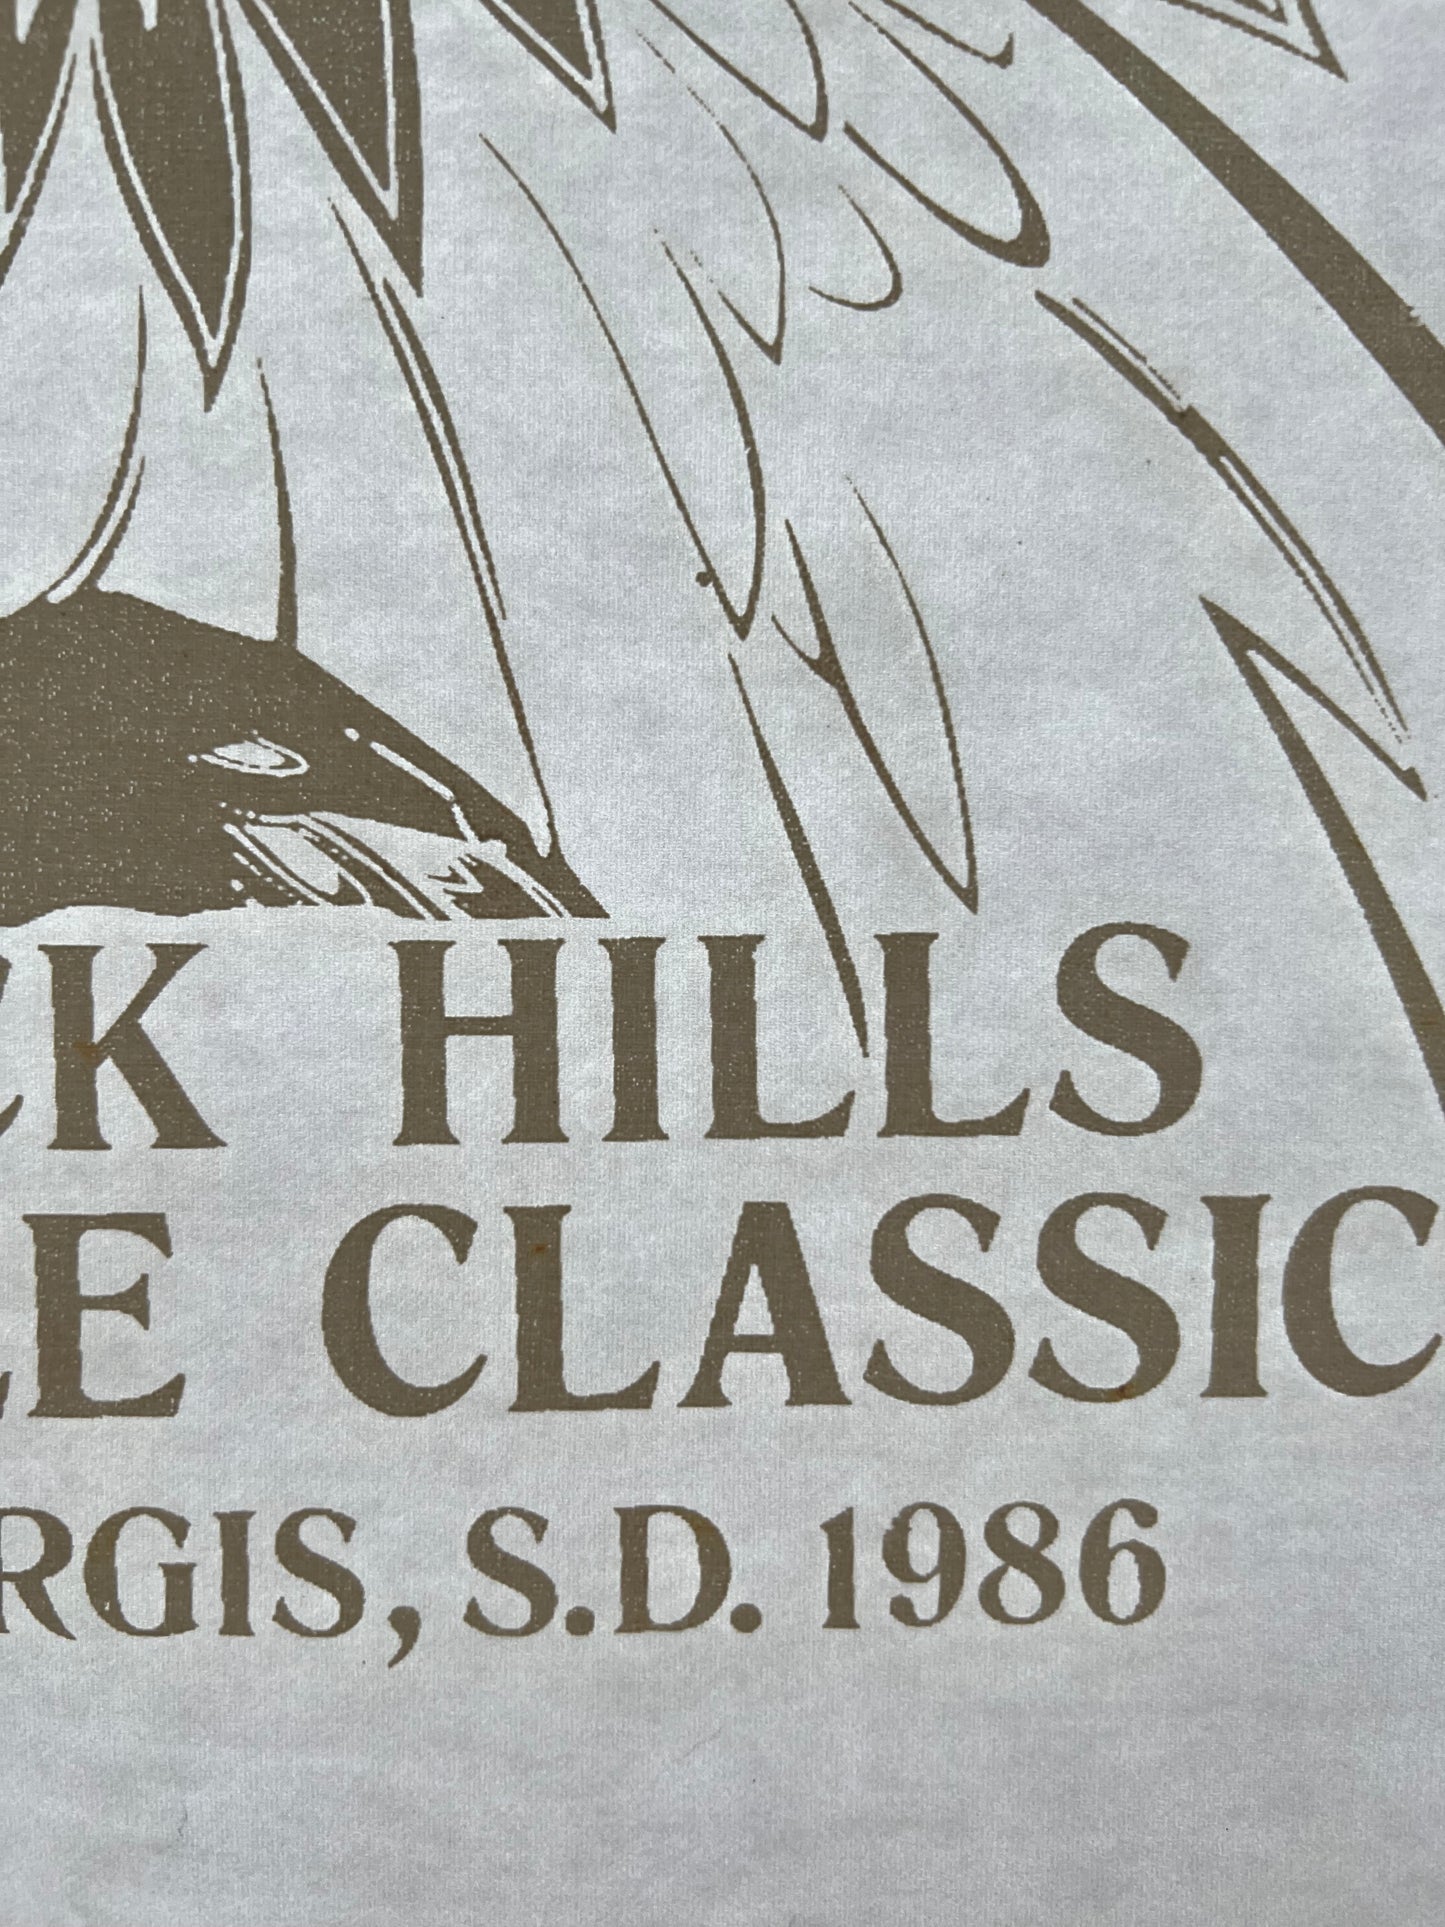 Black Hills Cycle Classis Sturgis, SD Vintage Iron On Heat Transfer